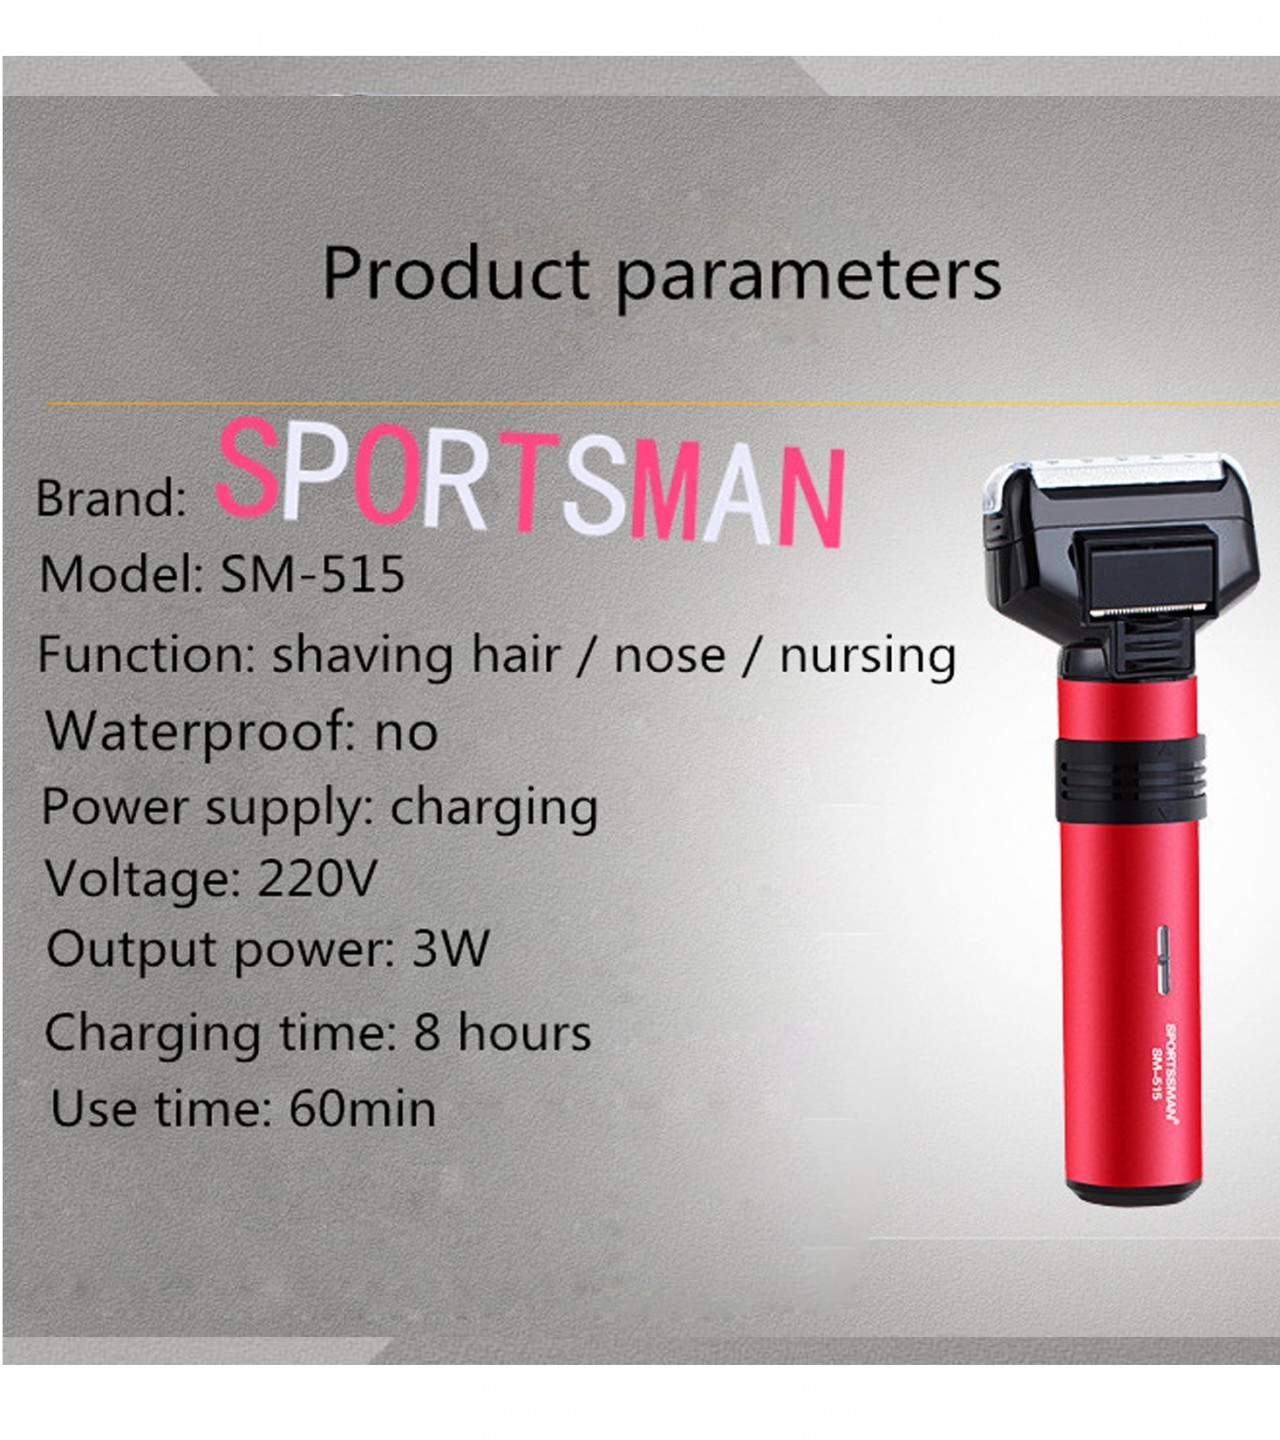 3 In 1 Electric Nose & Ear Trimmer SPORTSMAN SM-515 Multiple Function - SM-515